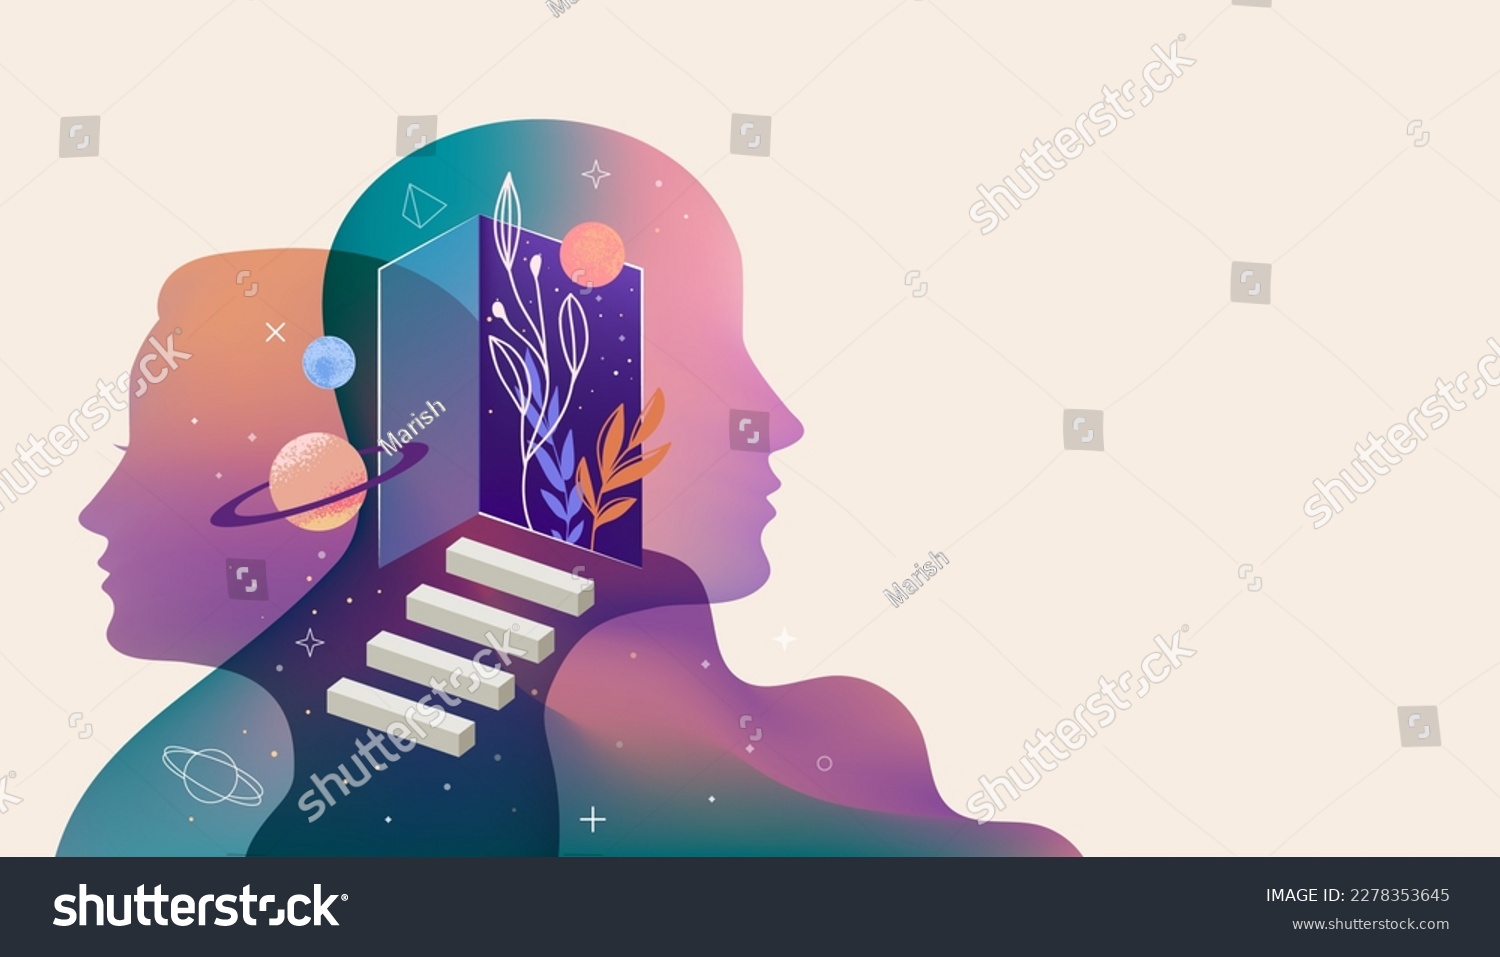 Psychology, Dream, Mental Health concept illustration. Brain, neuroscience and creative mind poster, cover #2278353645